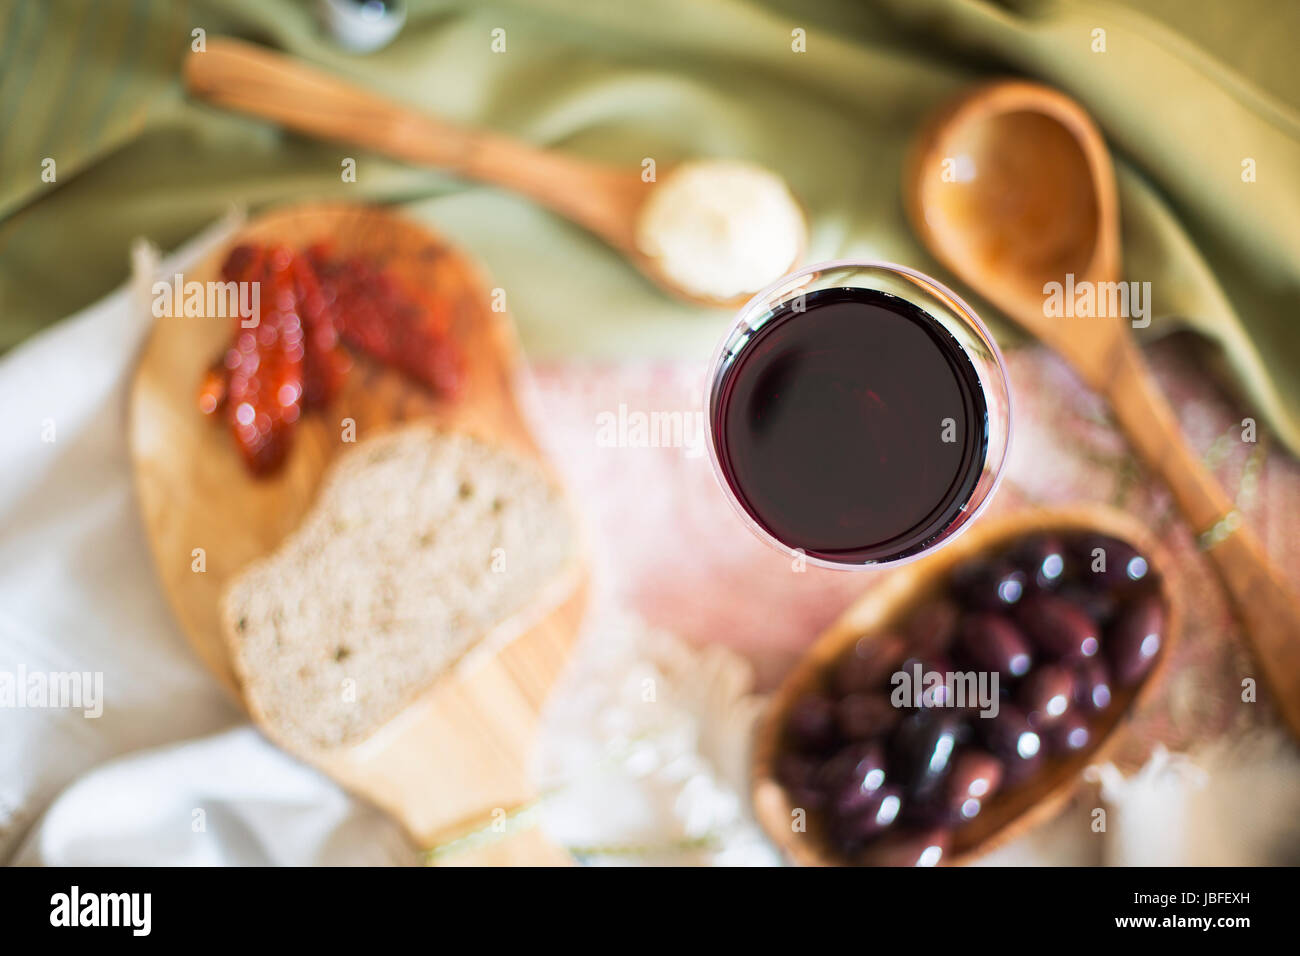 Red wine in glass from directly above with tapas out of focus on table. Stock Photo